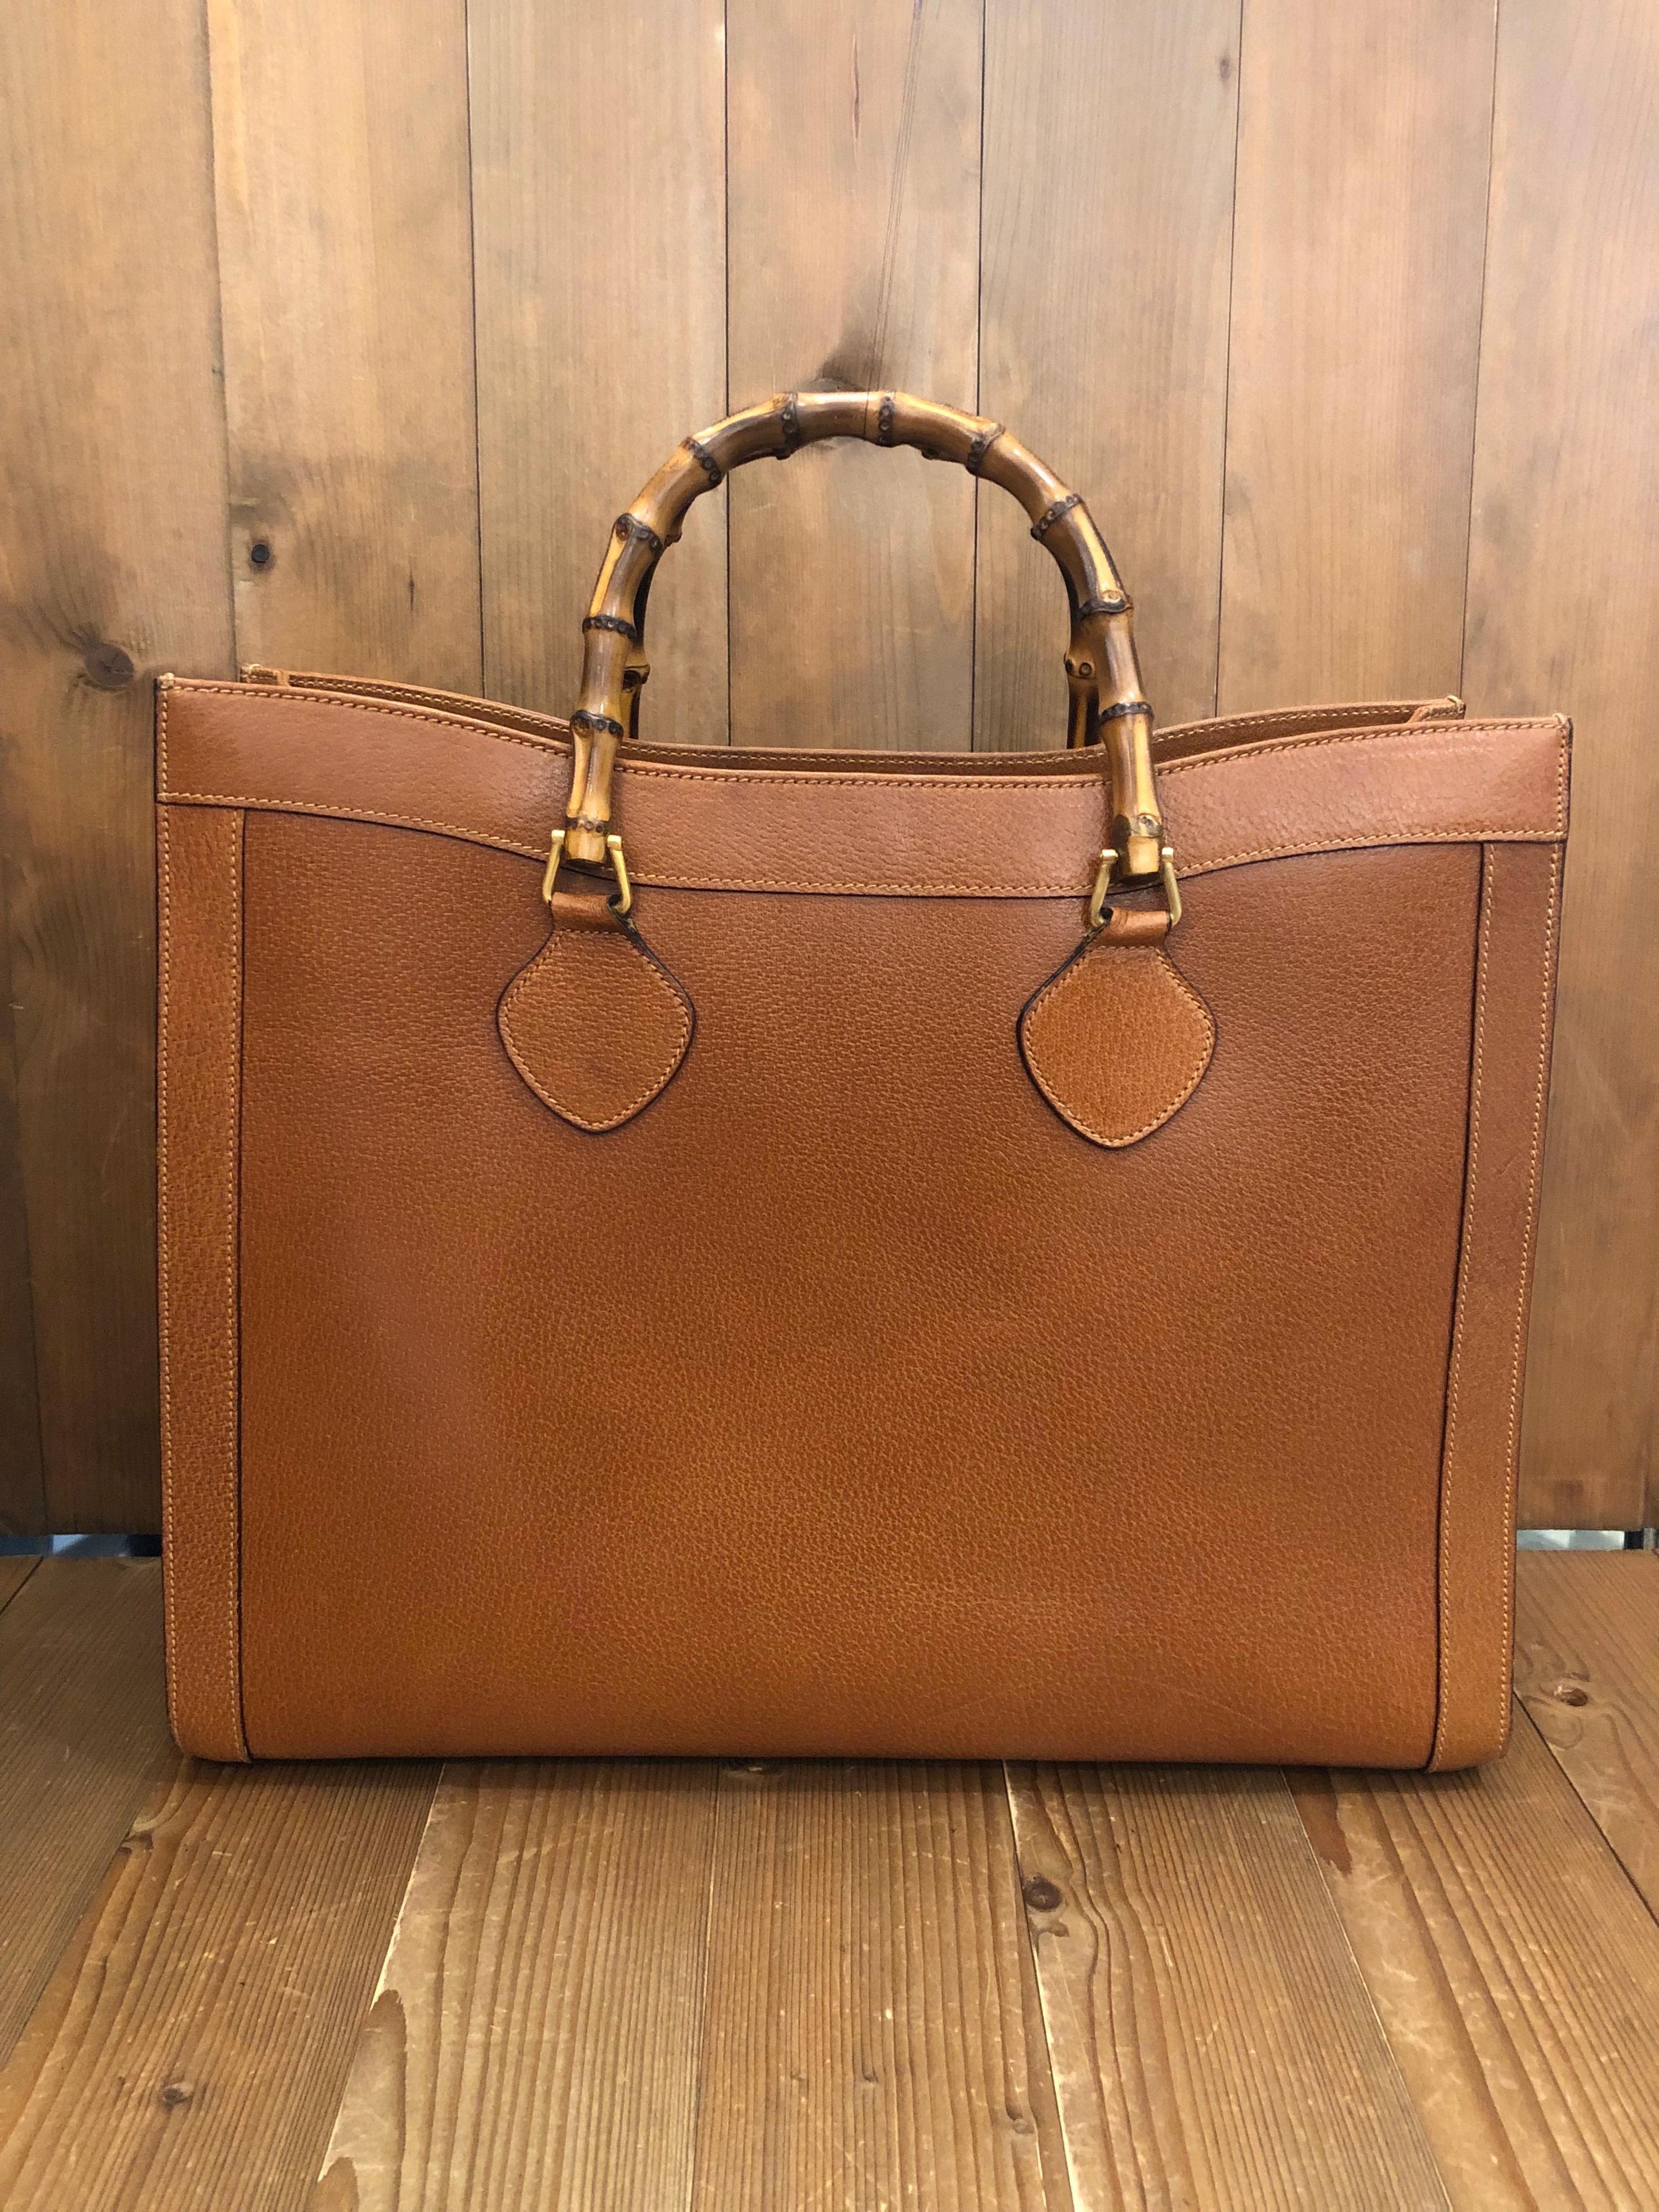 1990s Large sized Gucci bamboo tote in brown leather. The Bamboo tote is one of Princess Diana's favorite purses. Gucci revamped this Bamboo tote in 2021 winter collection. Made in Italy. Measures 17 x 14 x 5.75 inches handle drop 4” (large size).